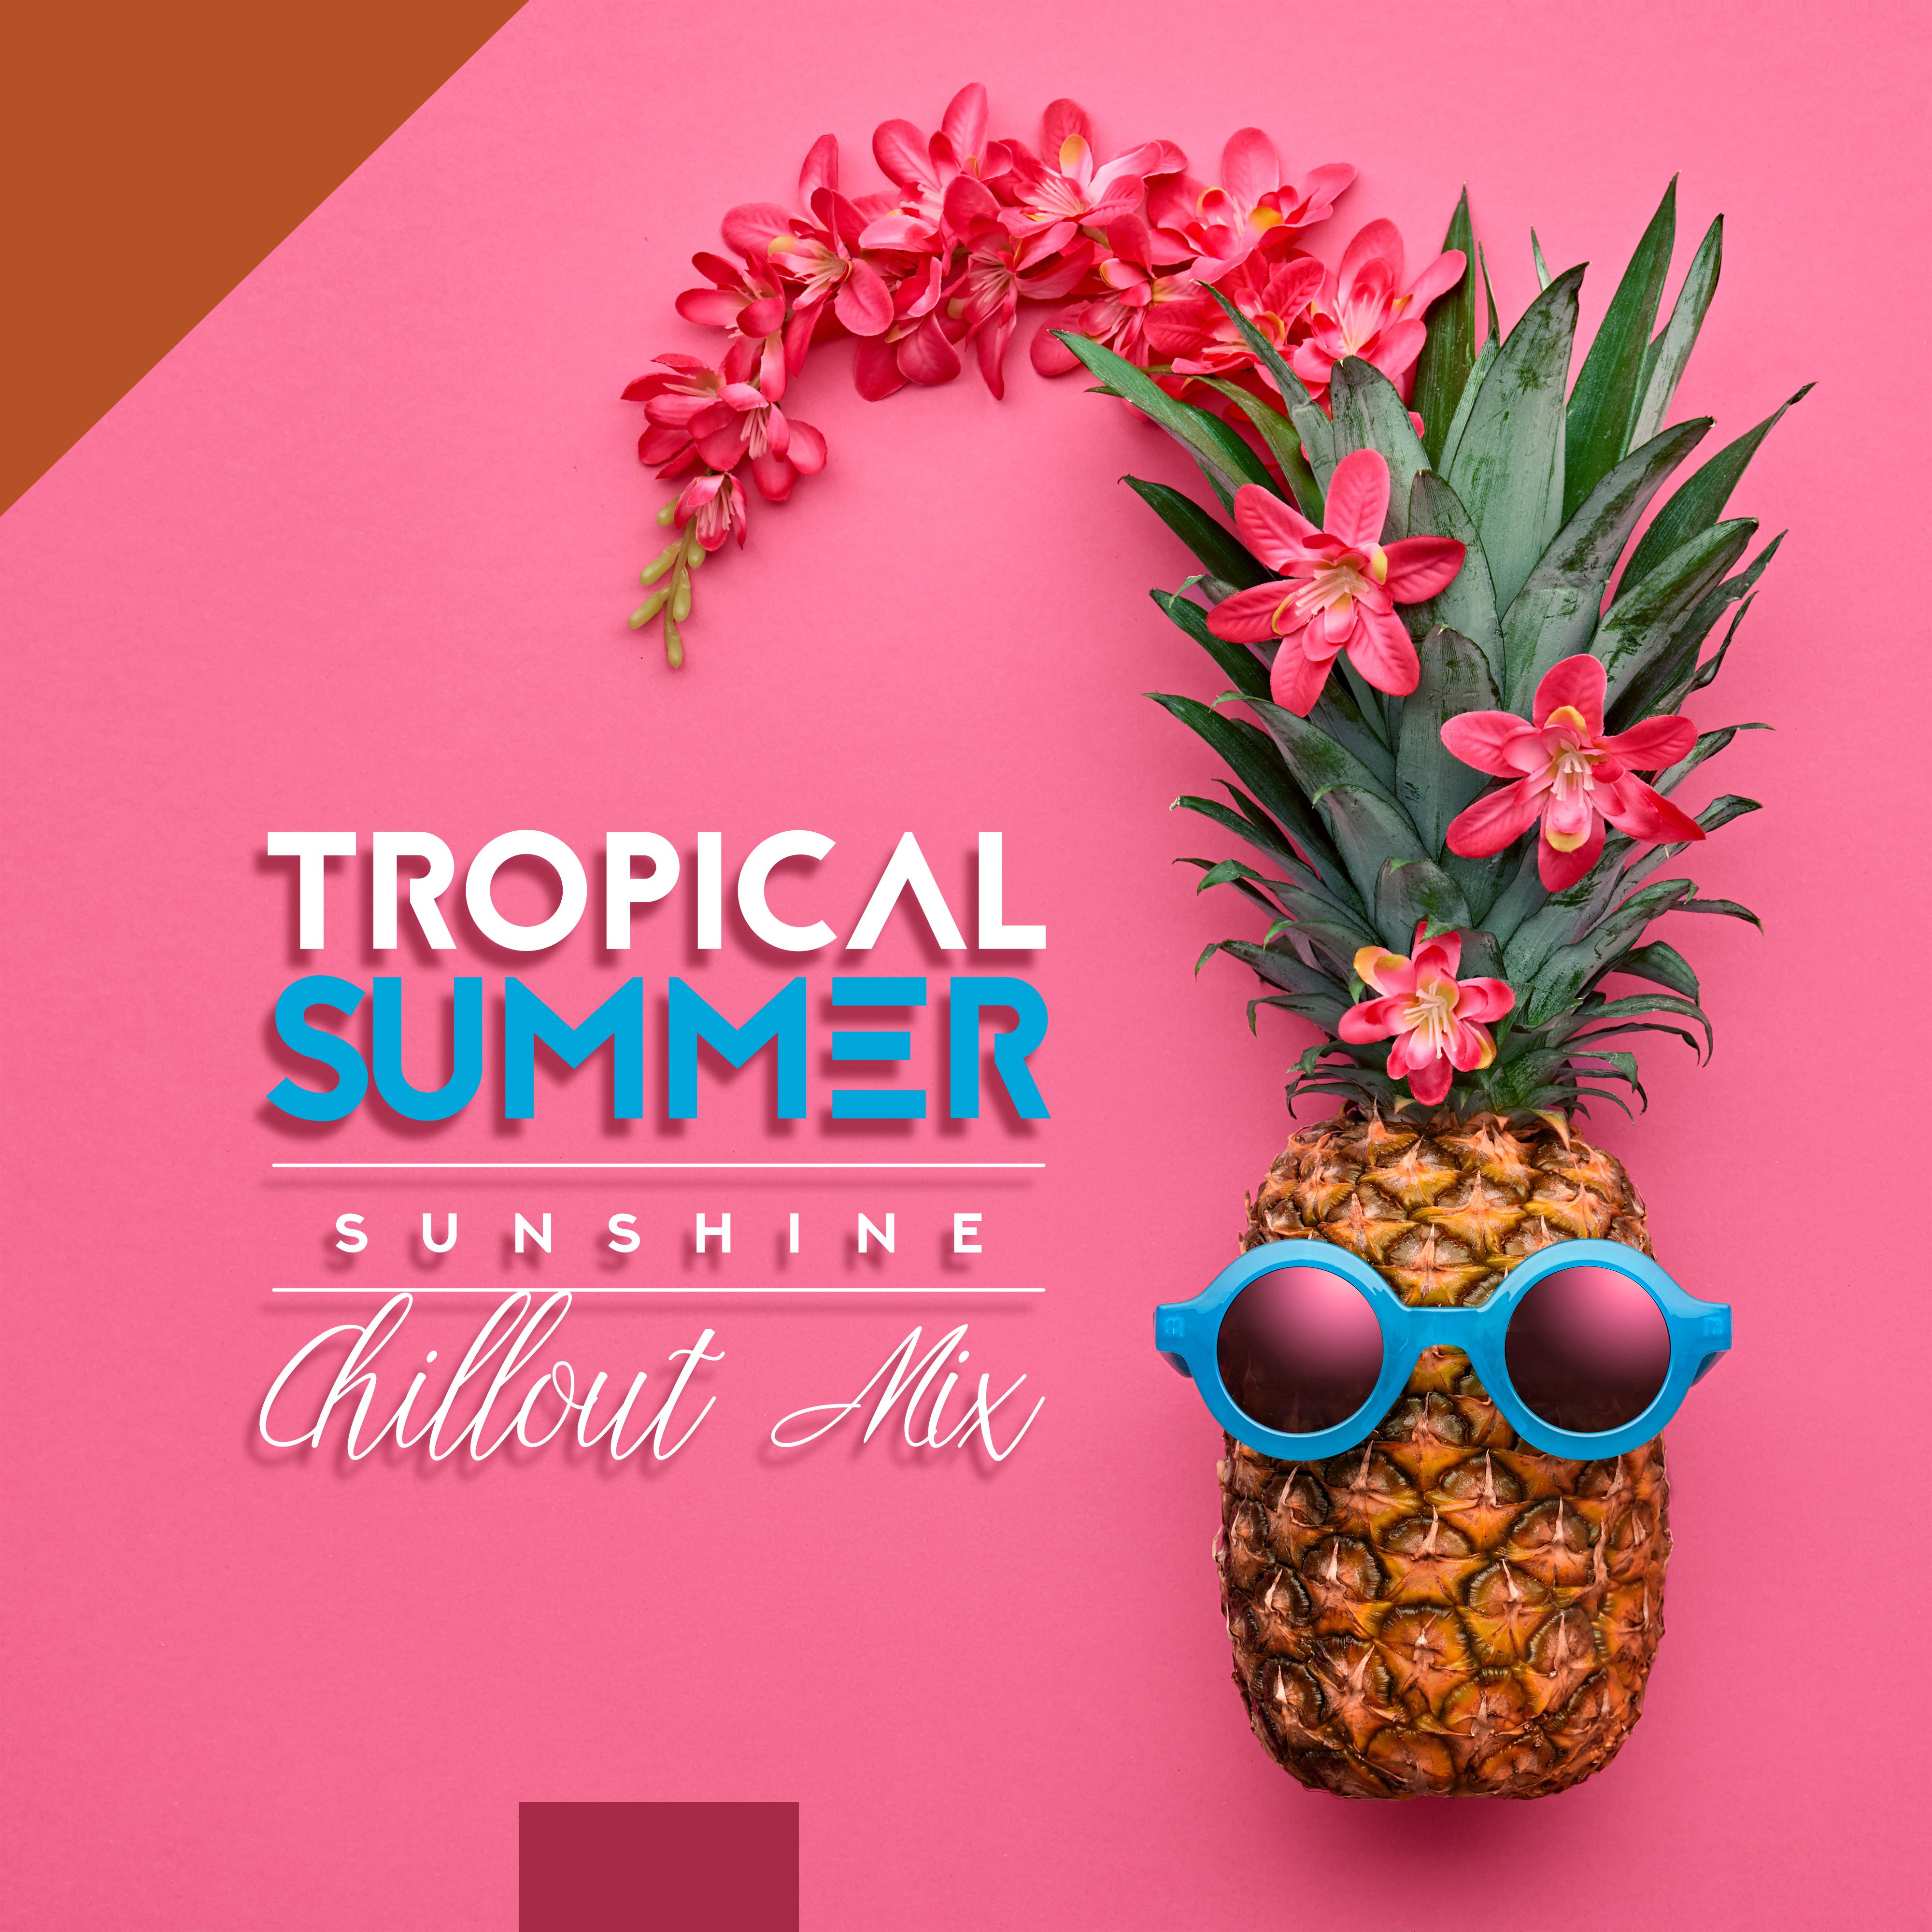 Tropical Summer Sunshine Chillout Mix  2019 Best Holiday Chill Out Music, Beach Bar Cocktail Party, Total Relaxation Vibes